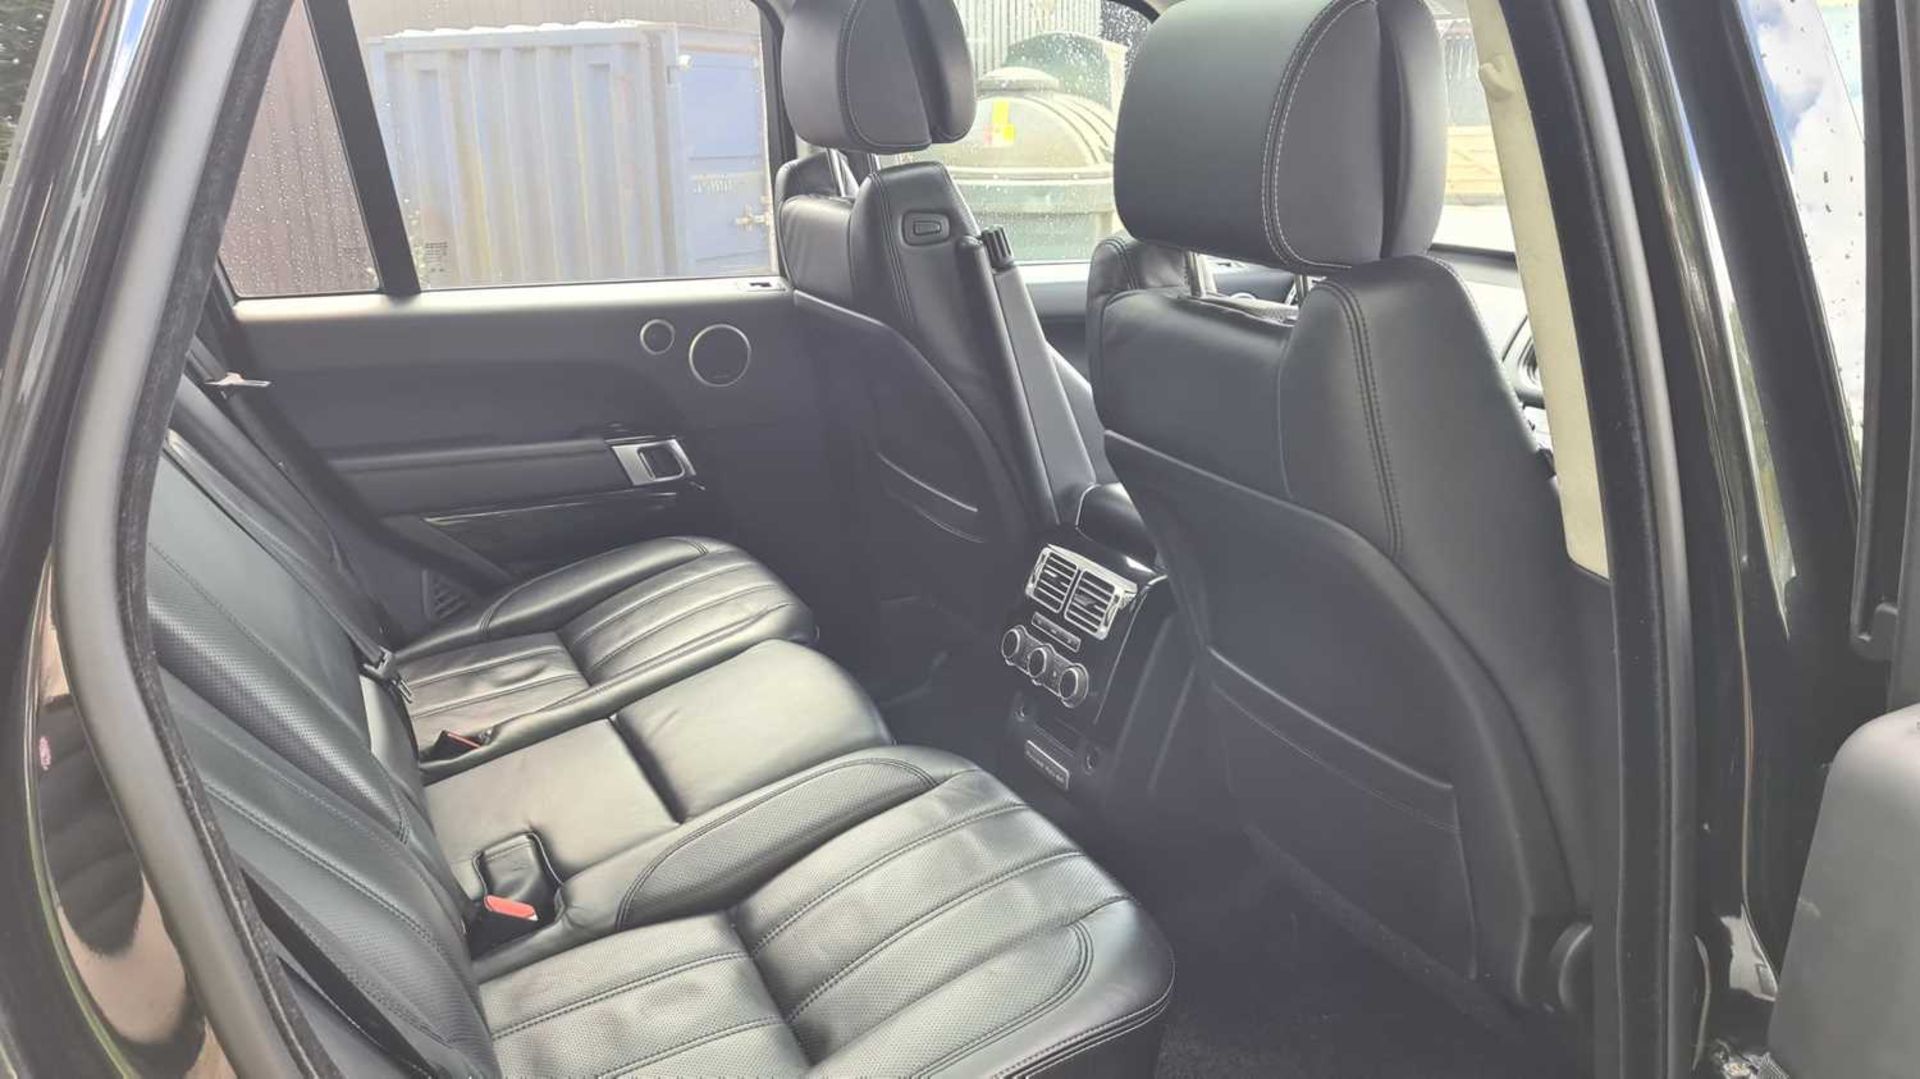 2014 Range Rover Autobiography SDV8, Auto, Paddle Shift, Parking Sensors, Full Leather, Heated Elect - Image 8 of 13